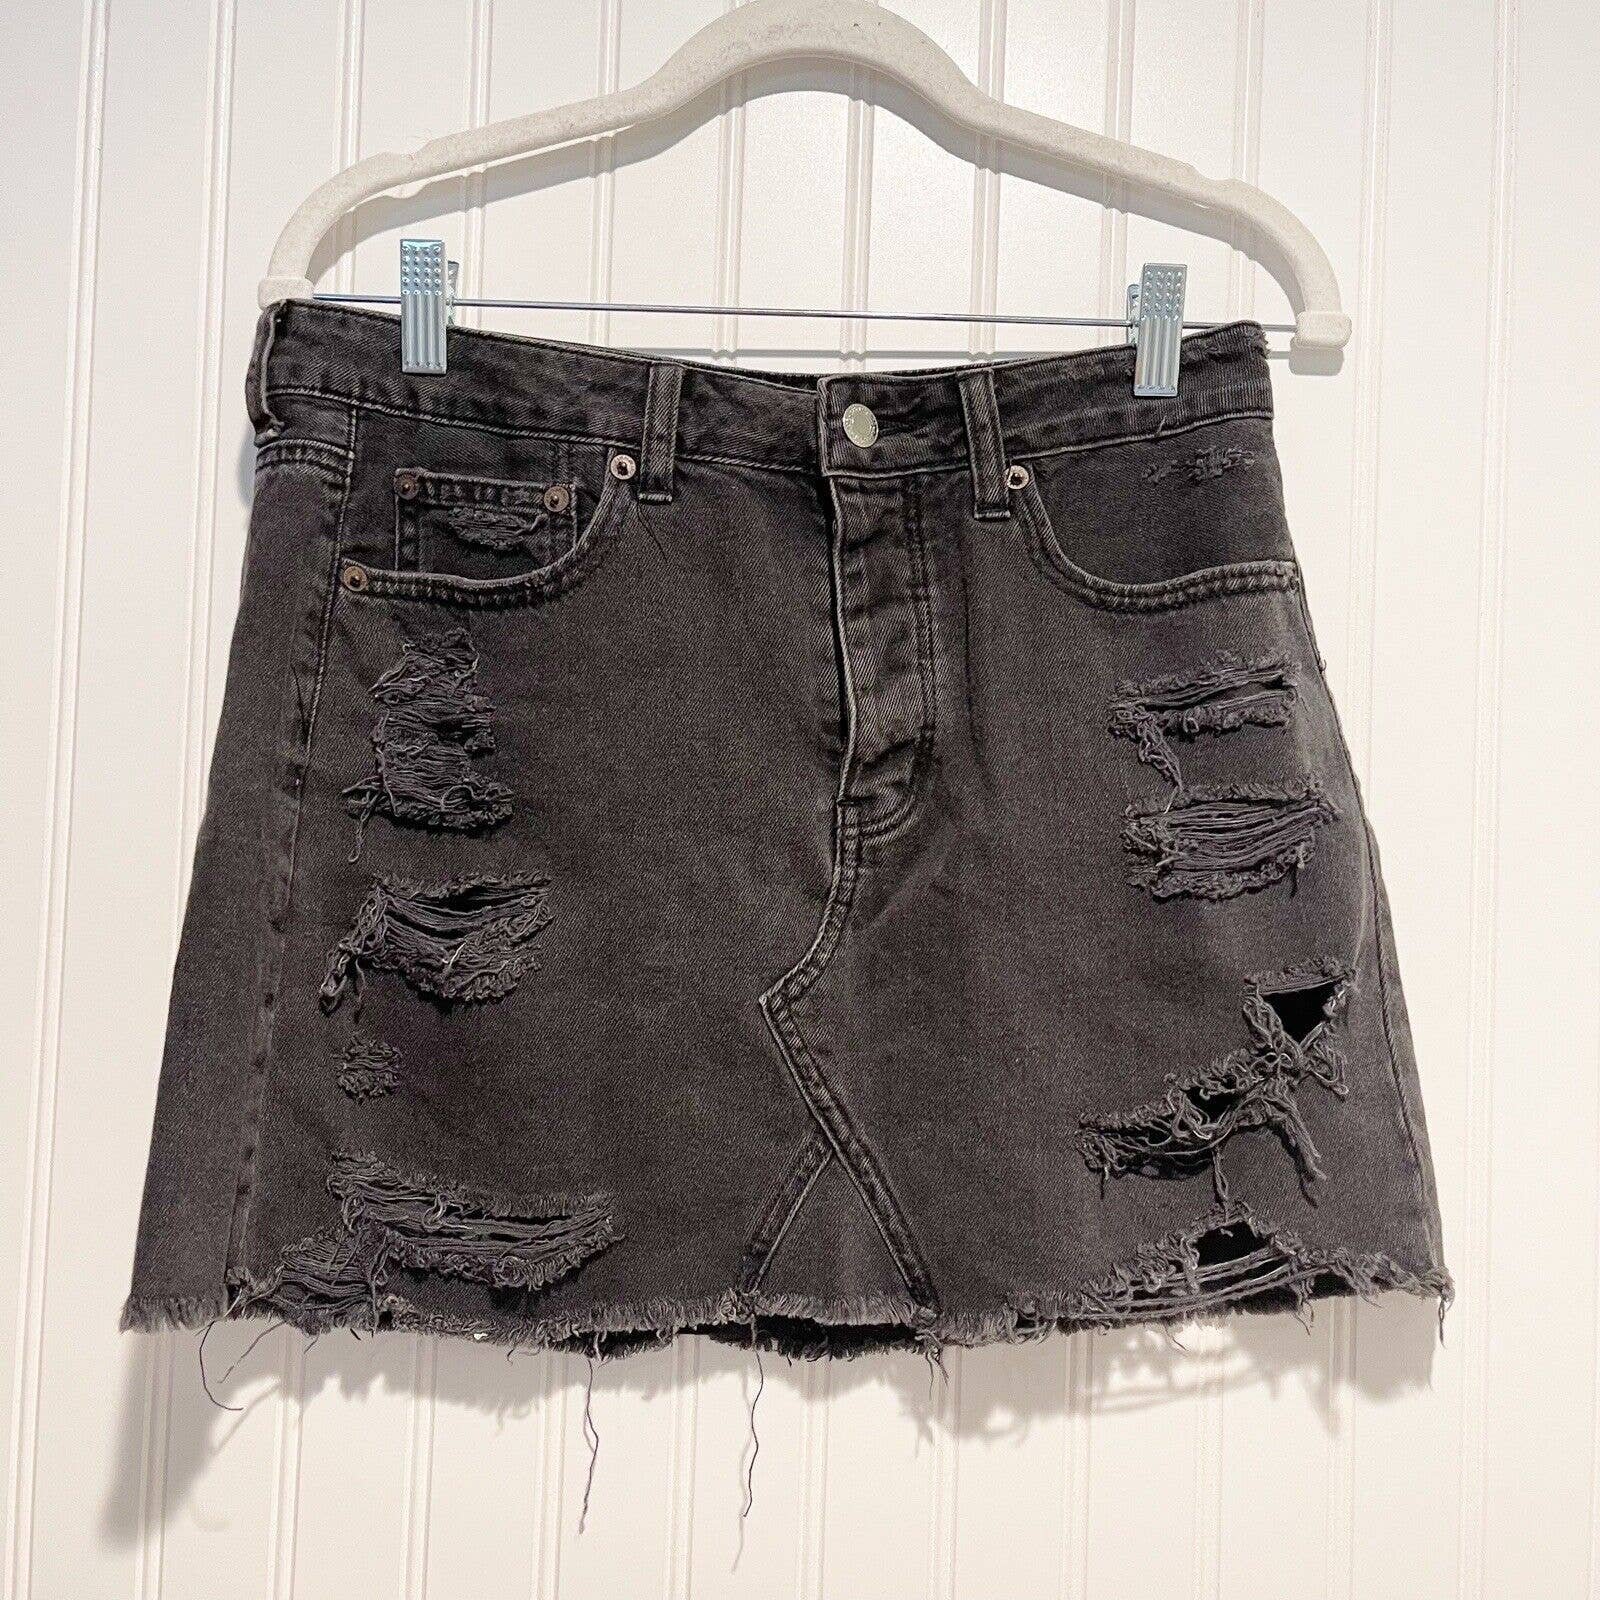 the Lowest price American Eagle Black Denim Skirt Butto